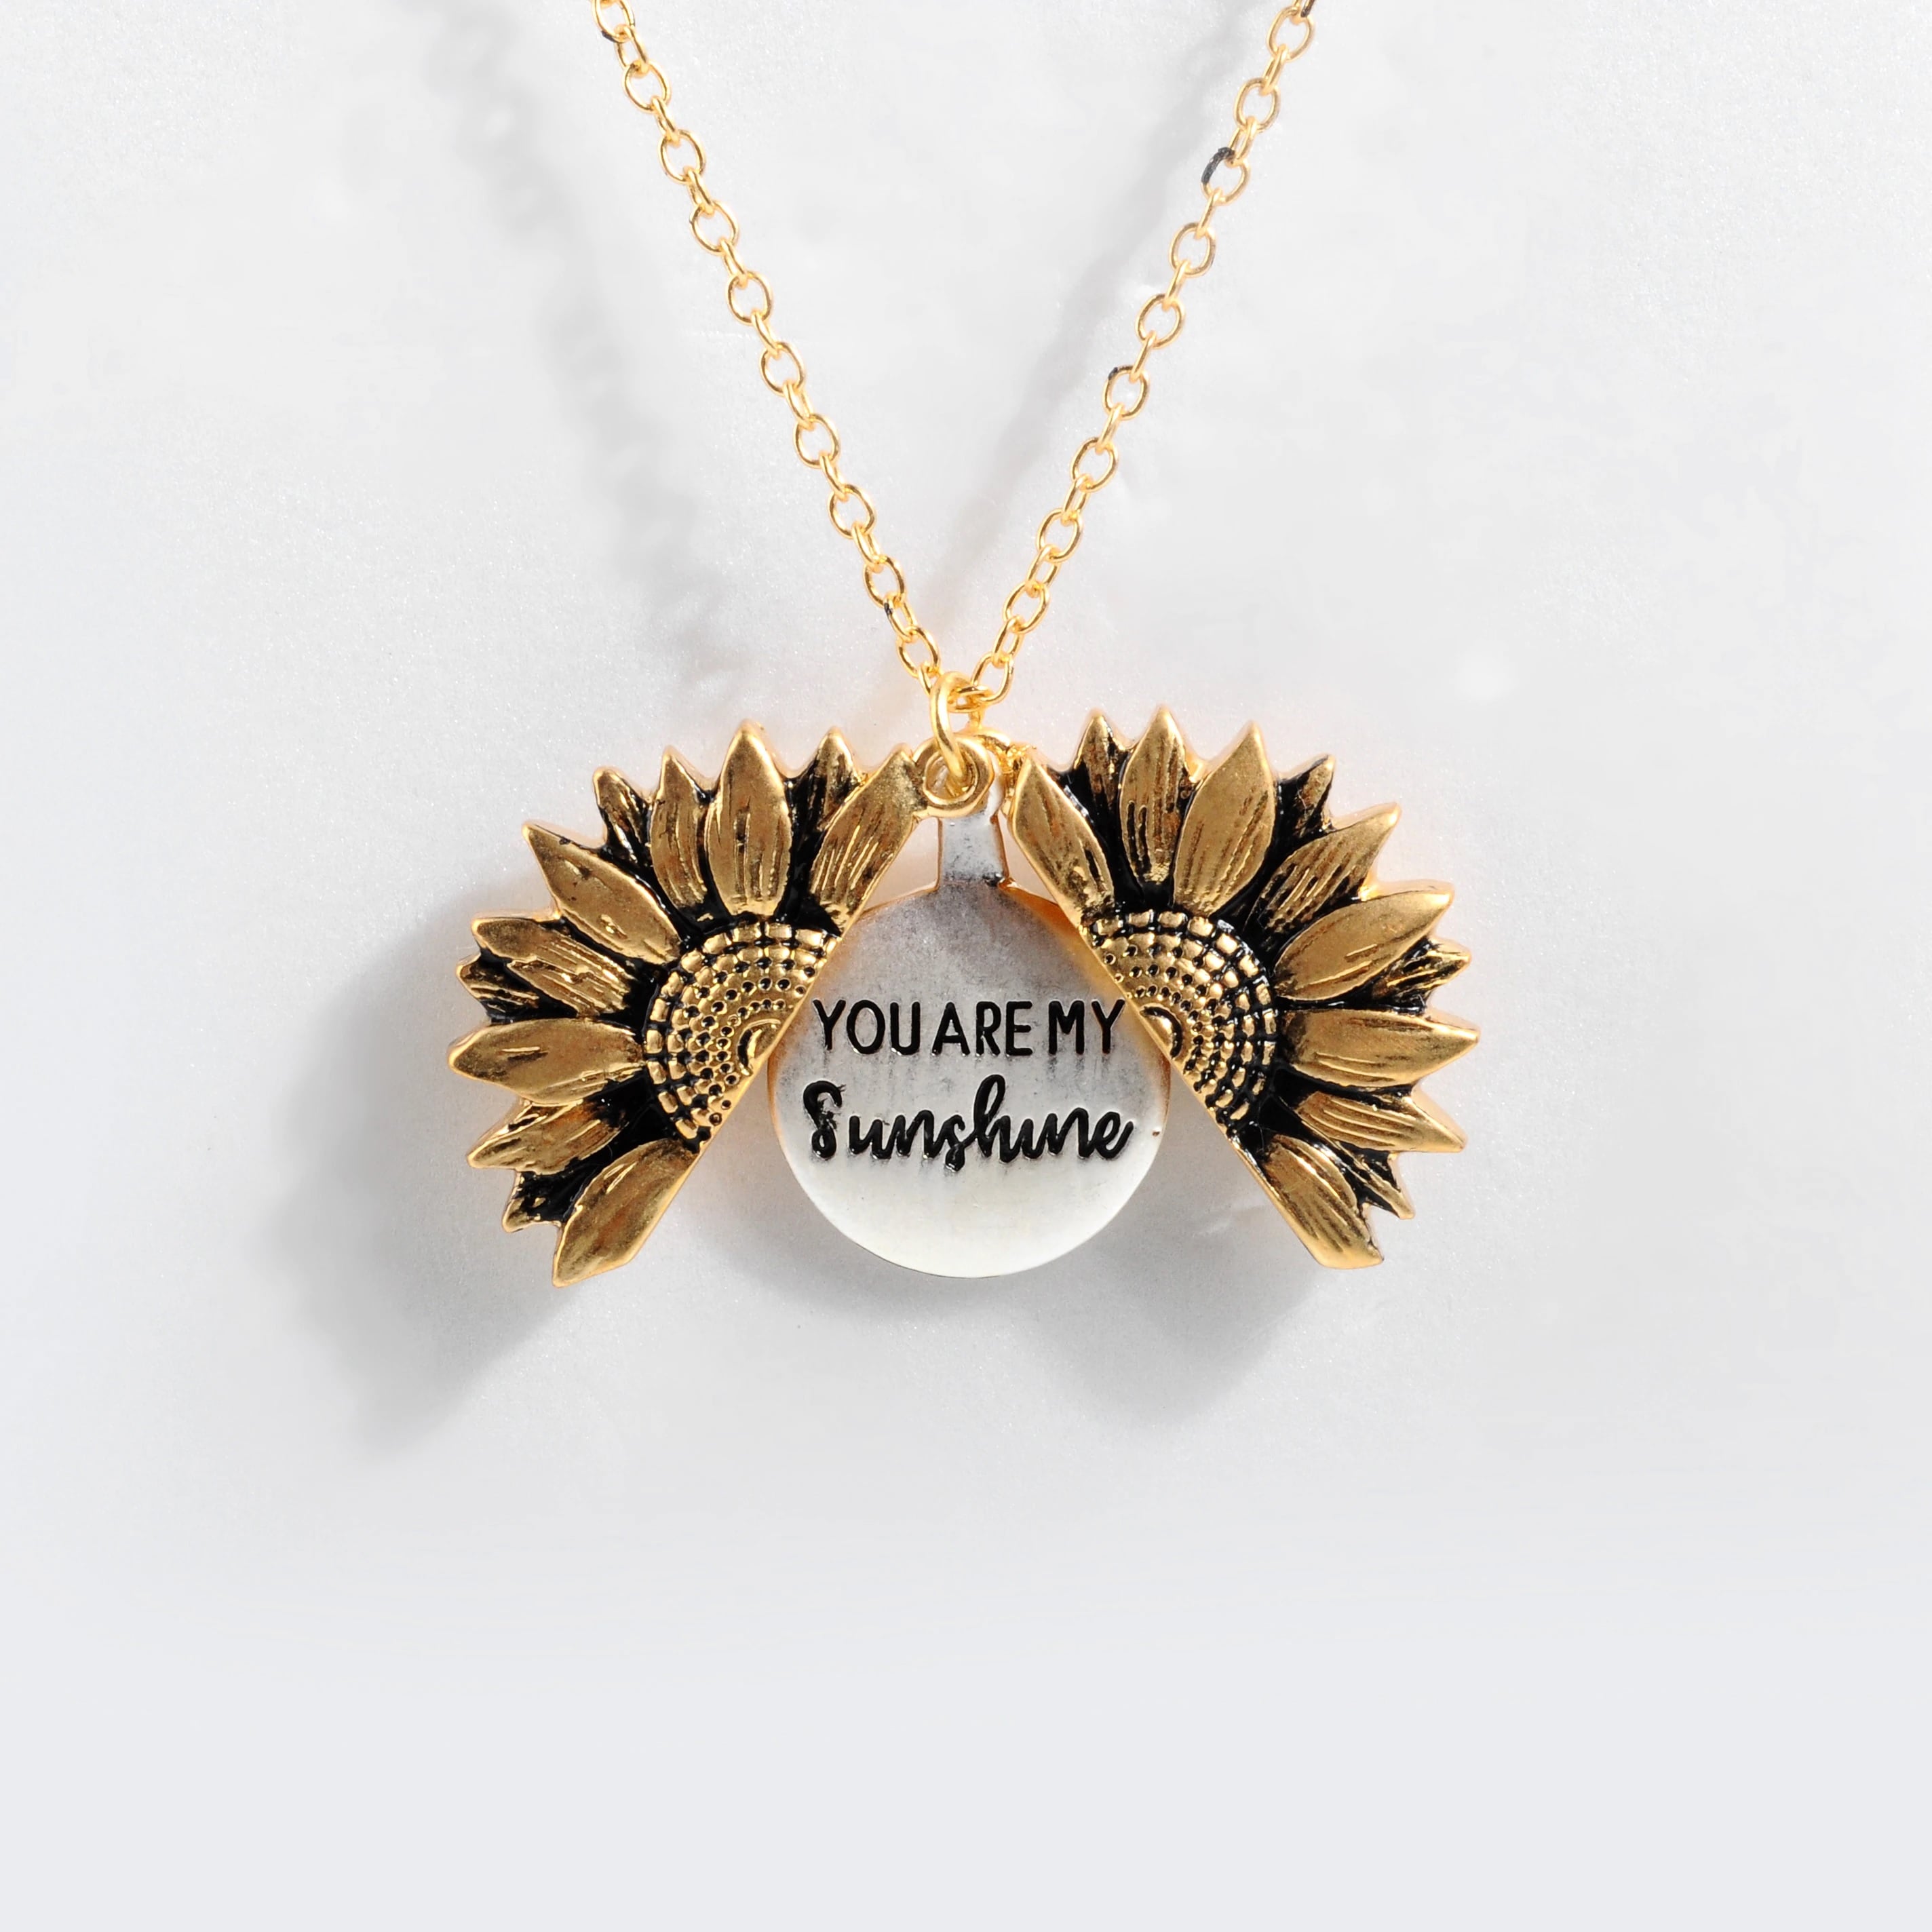 "YOU ARE MY SUNSHINE" Necklace (with FREE Gift Box)